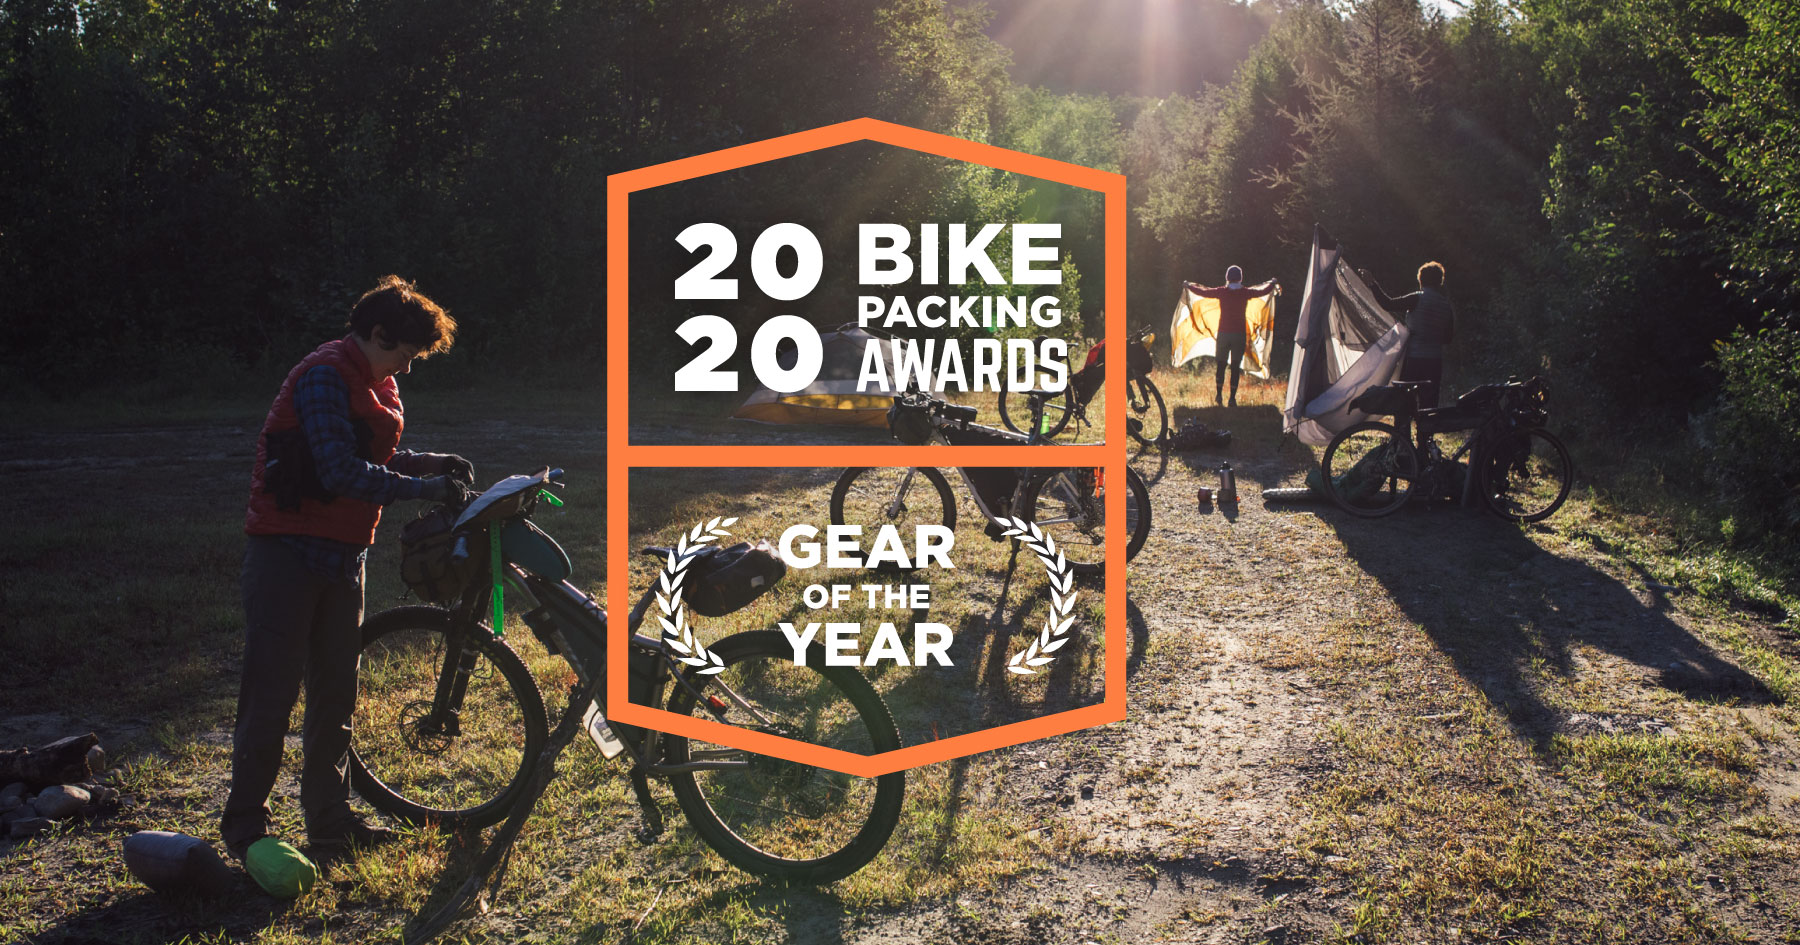 2020 Bikepacking Gear of the Year Awards